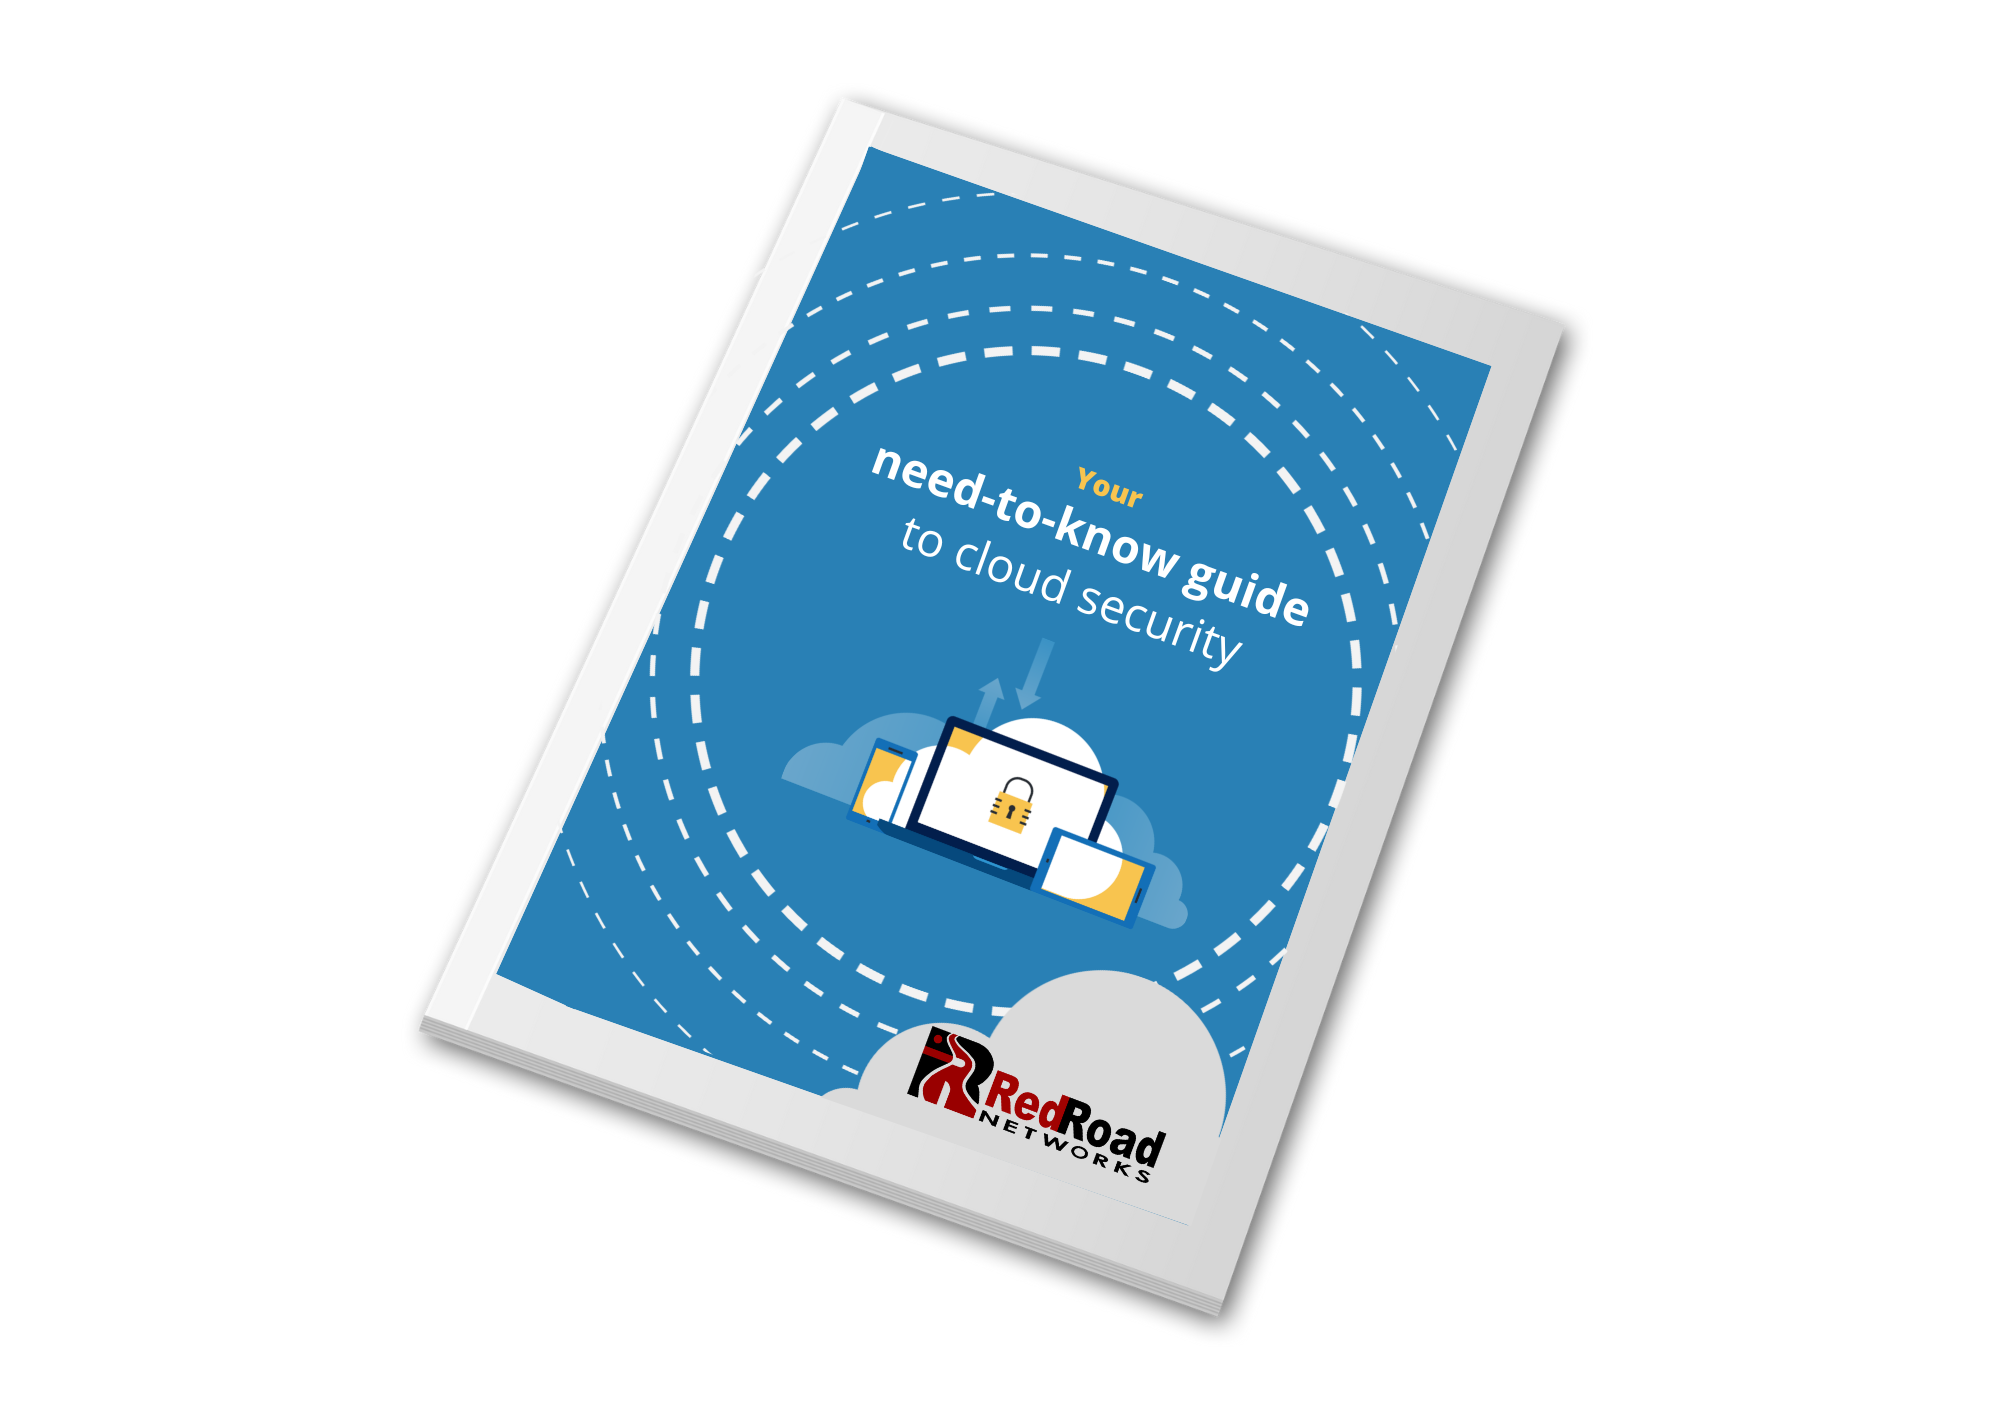 Your need-to-know guide to cloud security | IT Services | Cloud computing